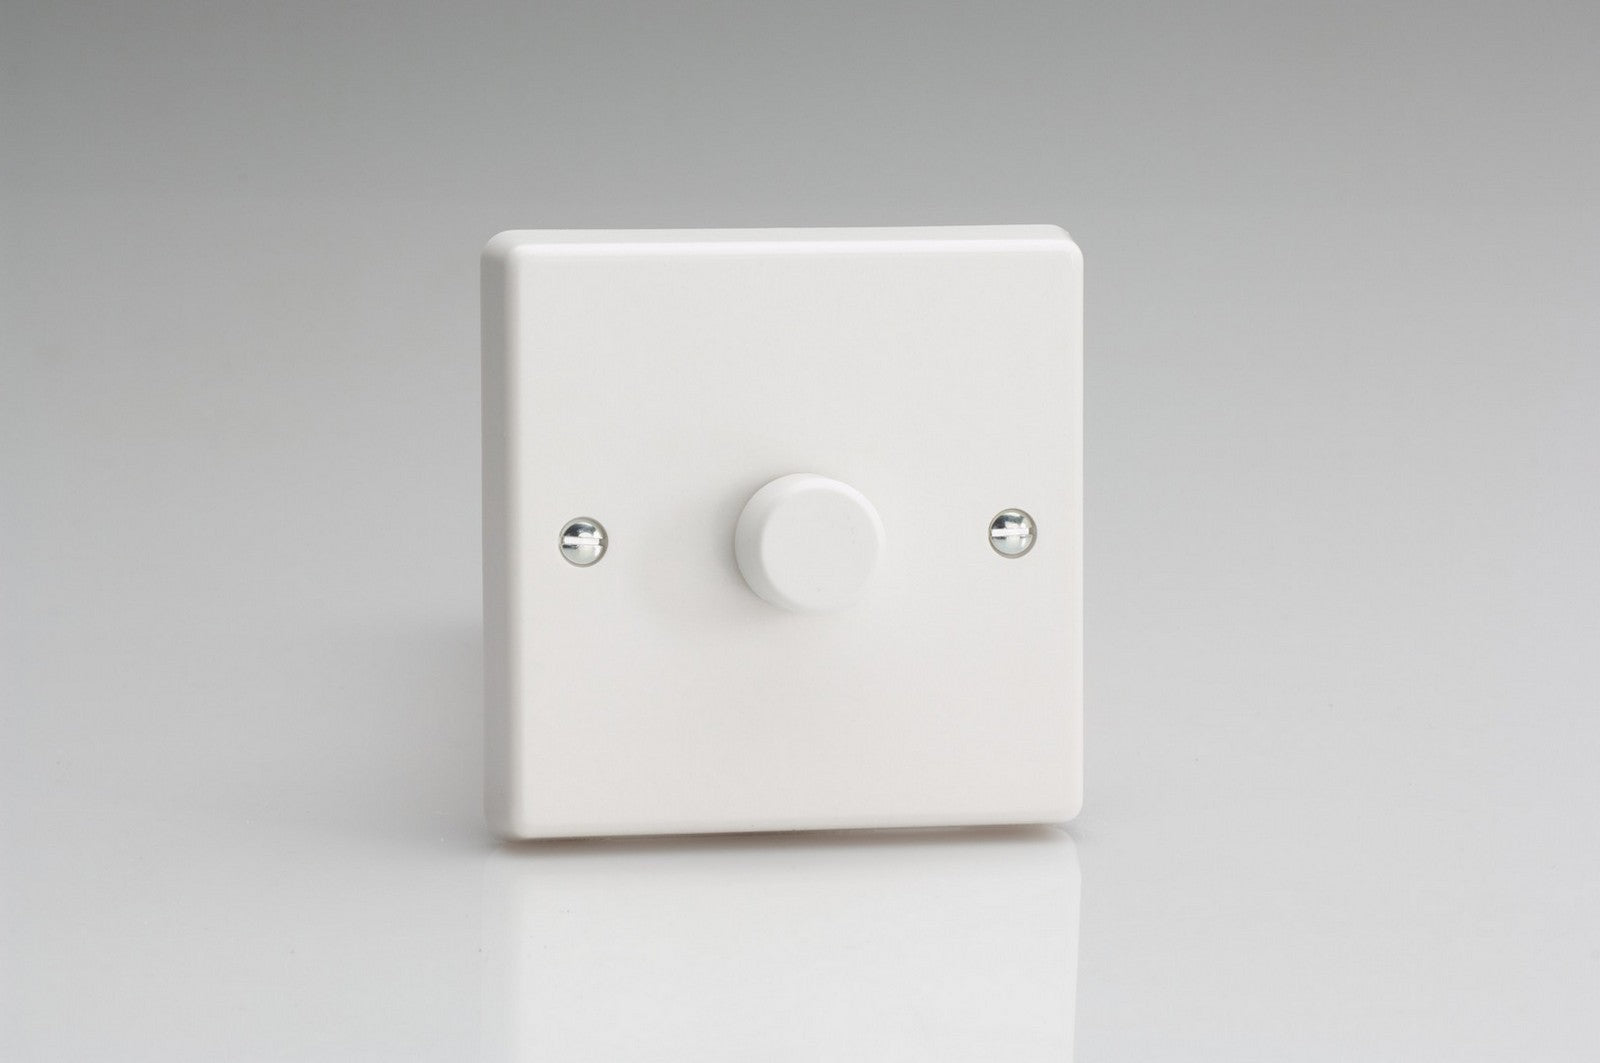 Dimmer Switch 1 Gang 0-120W (1-10 LEDs)